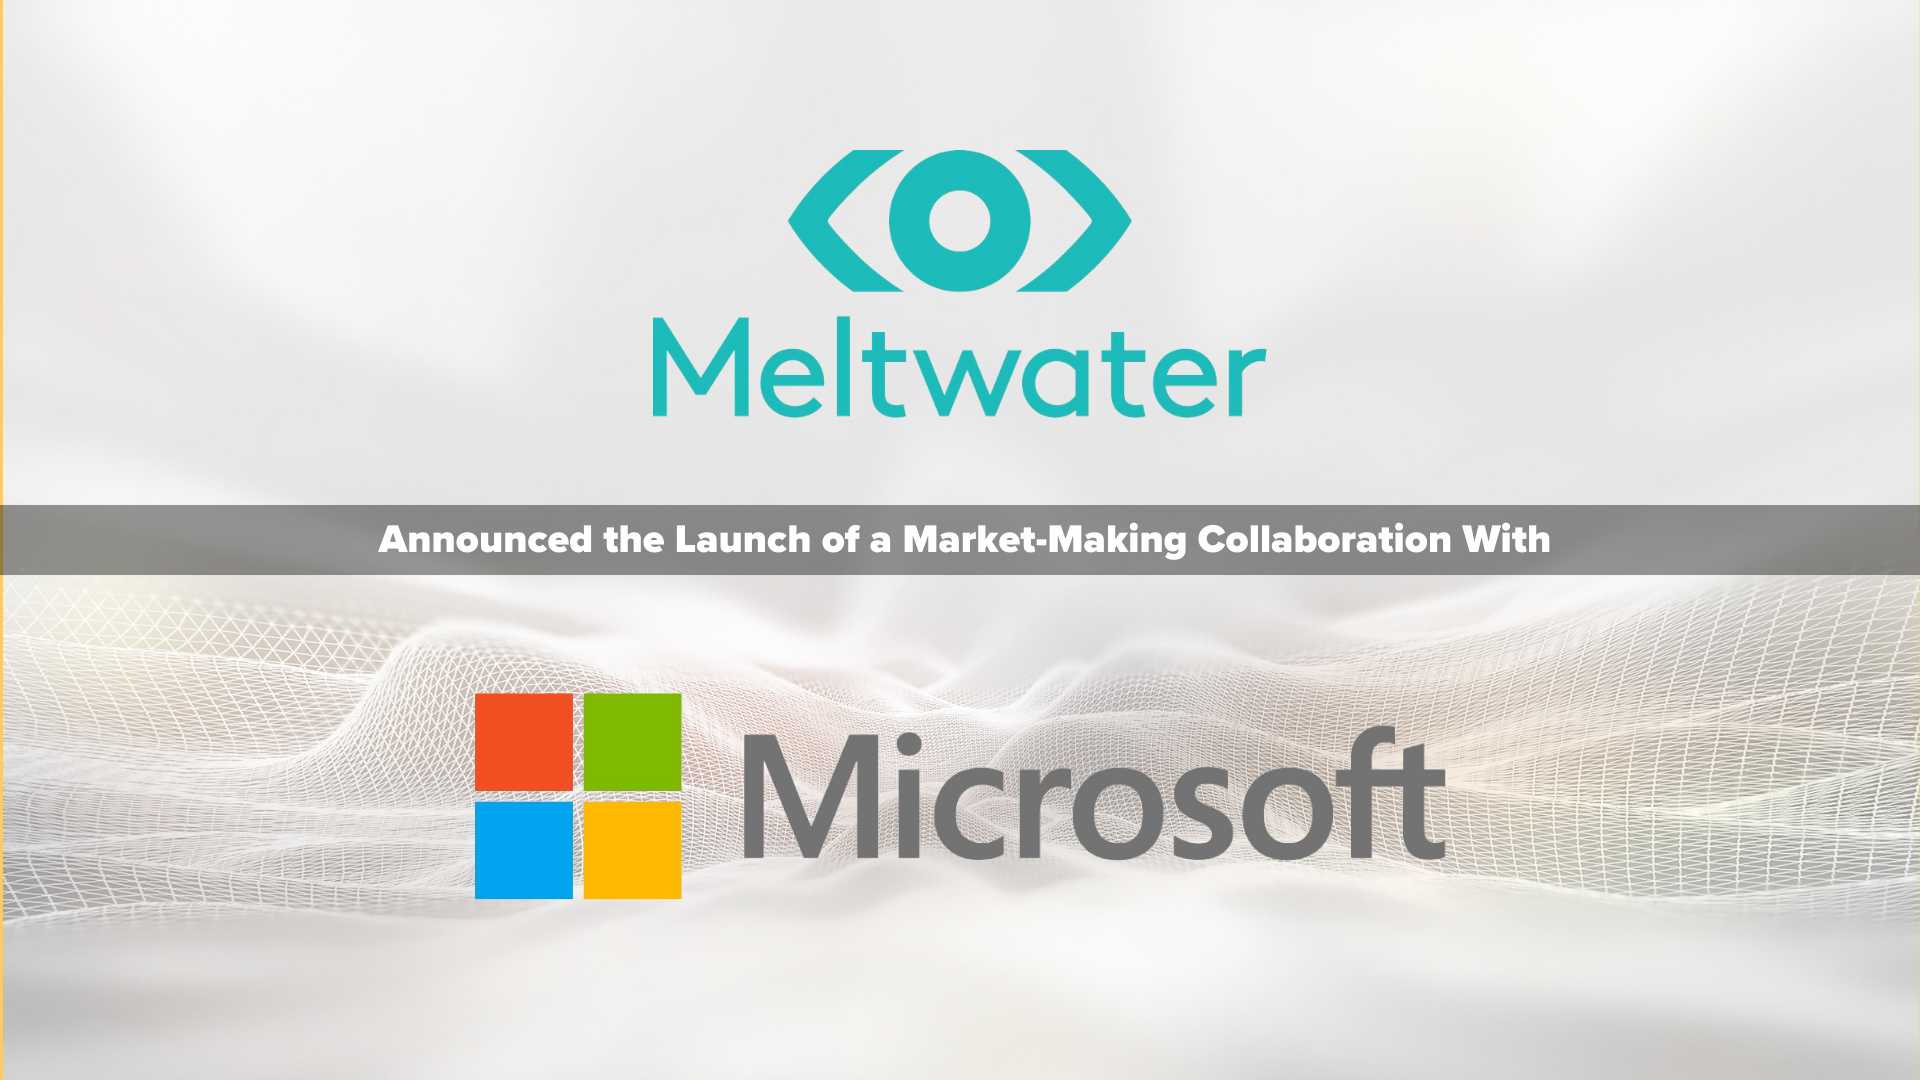 Meltwater joins forces with Microsoft to bring to market the next-generation, AI-powered communication insights solution built on Microsoft Azure